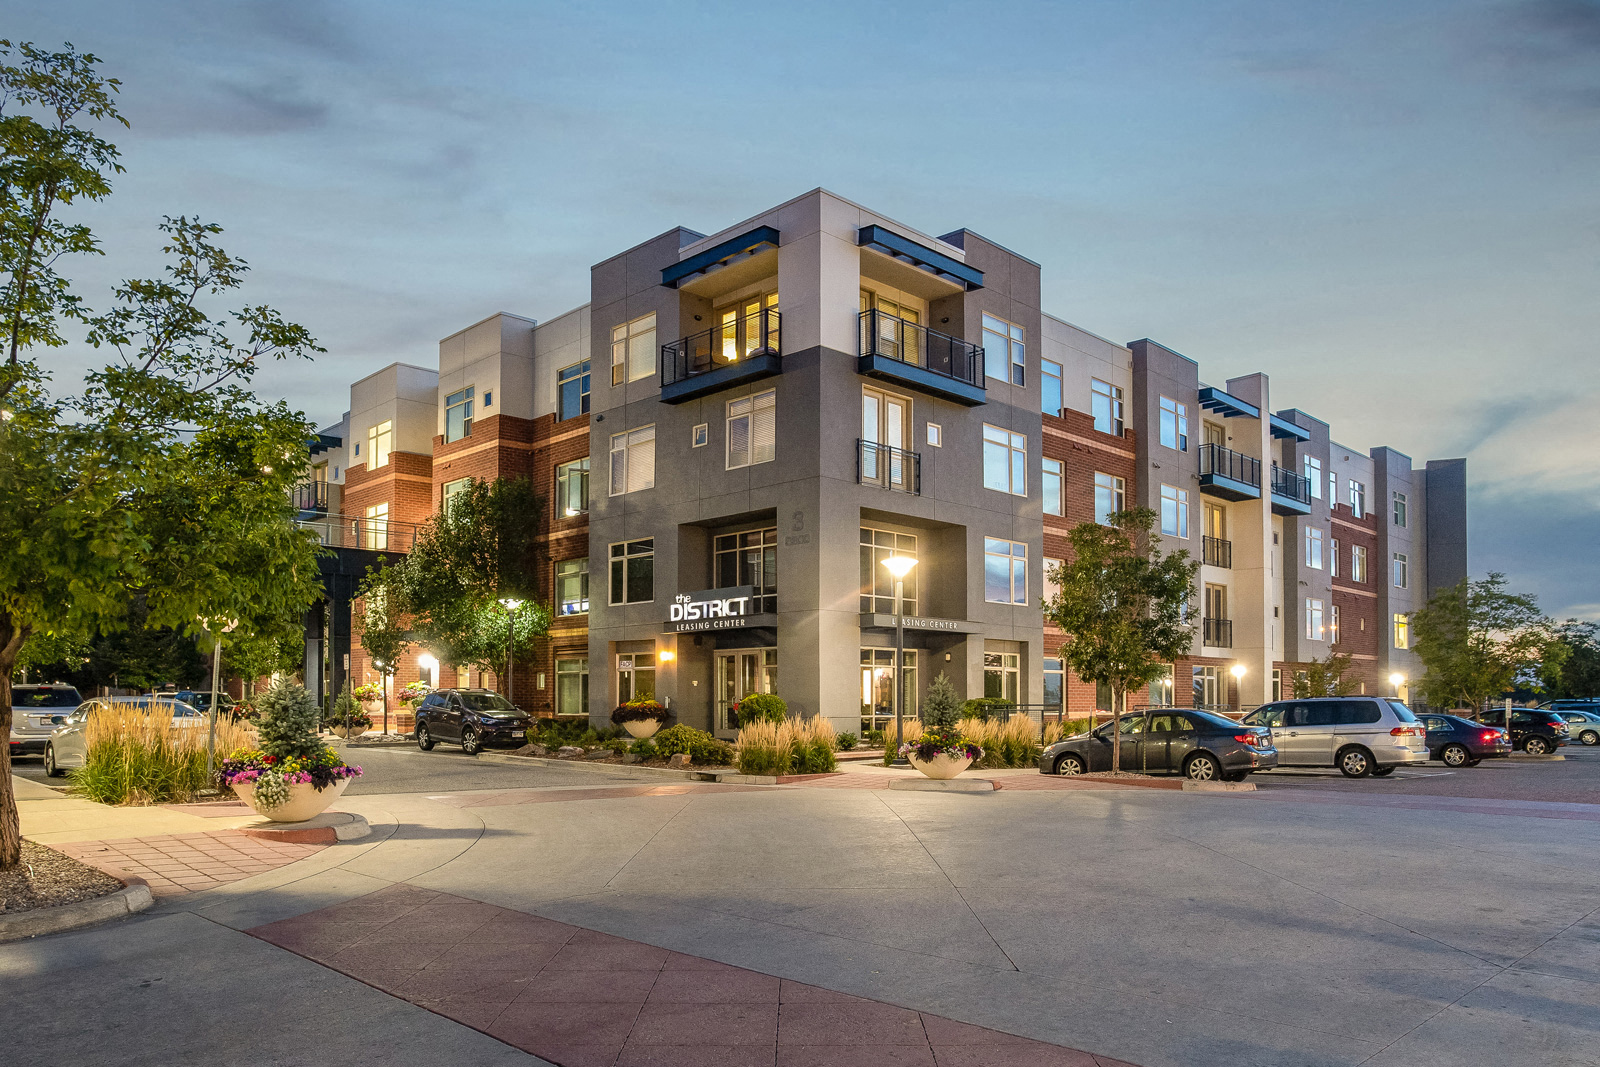 Apartments In Denver Co Home. apartments by light rail denver the district ...